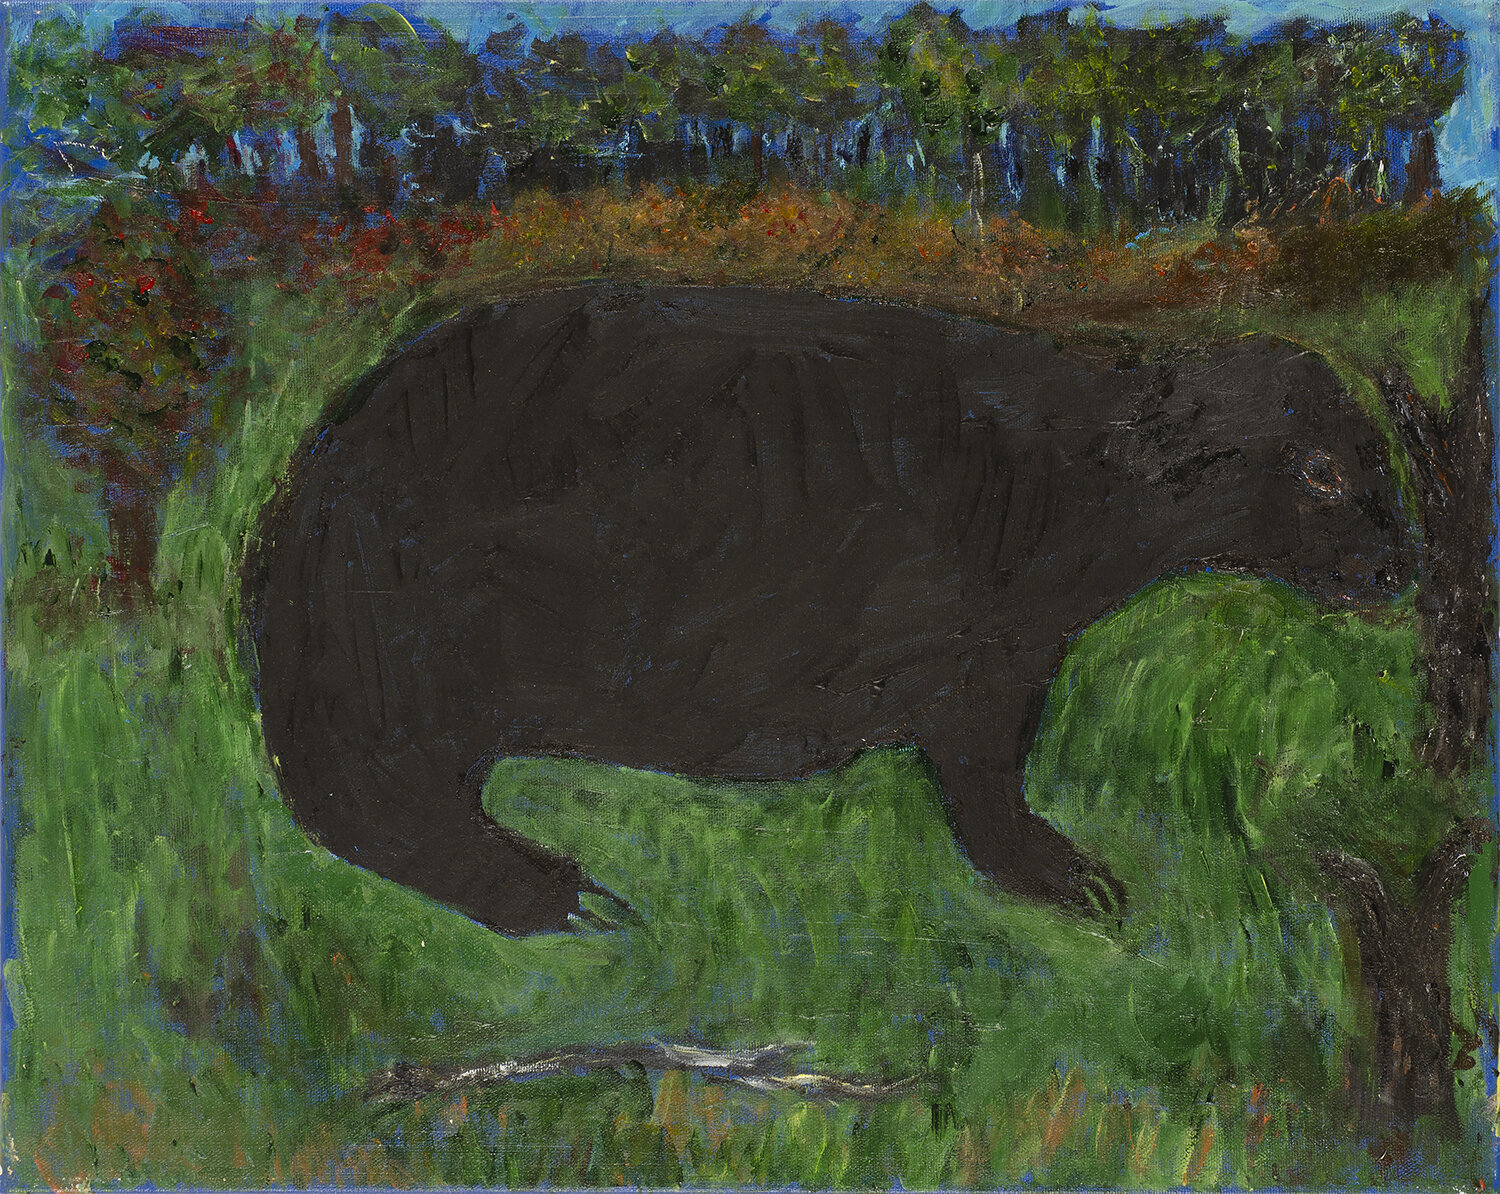 Andre Lanthier, Bear of Forest, 16x20, acrylic and asphalt on canvas, 2018